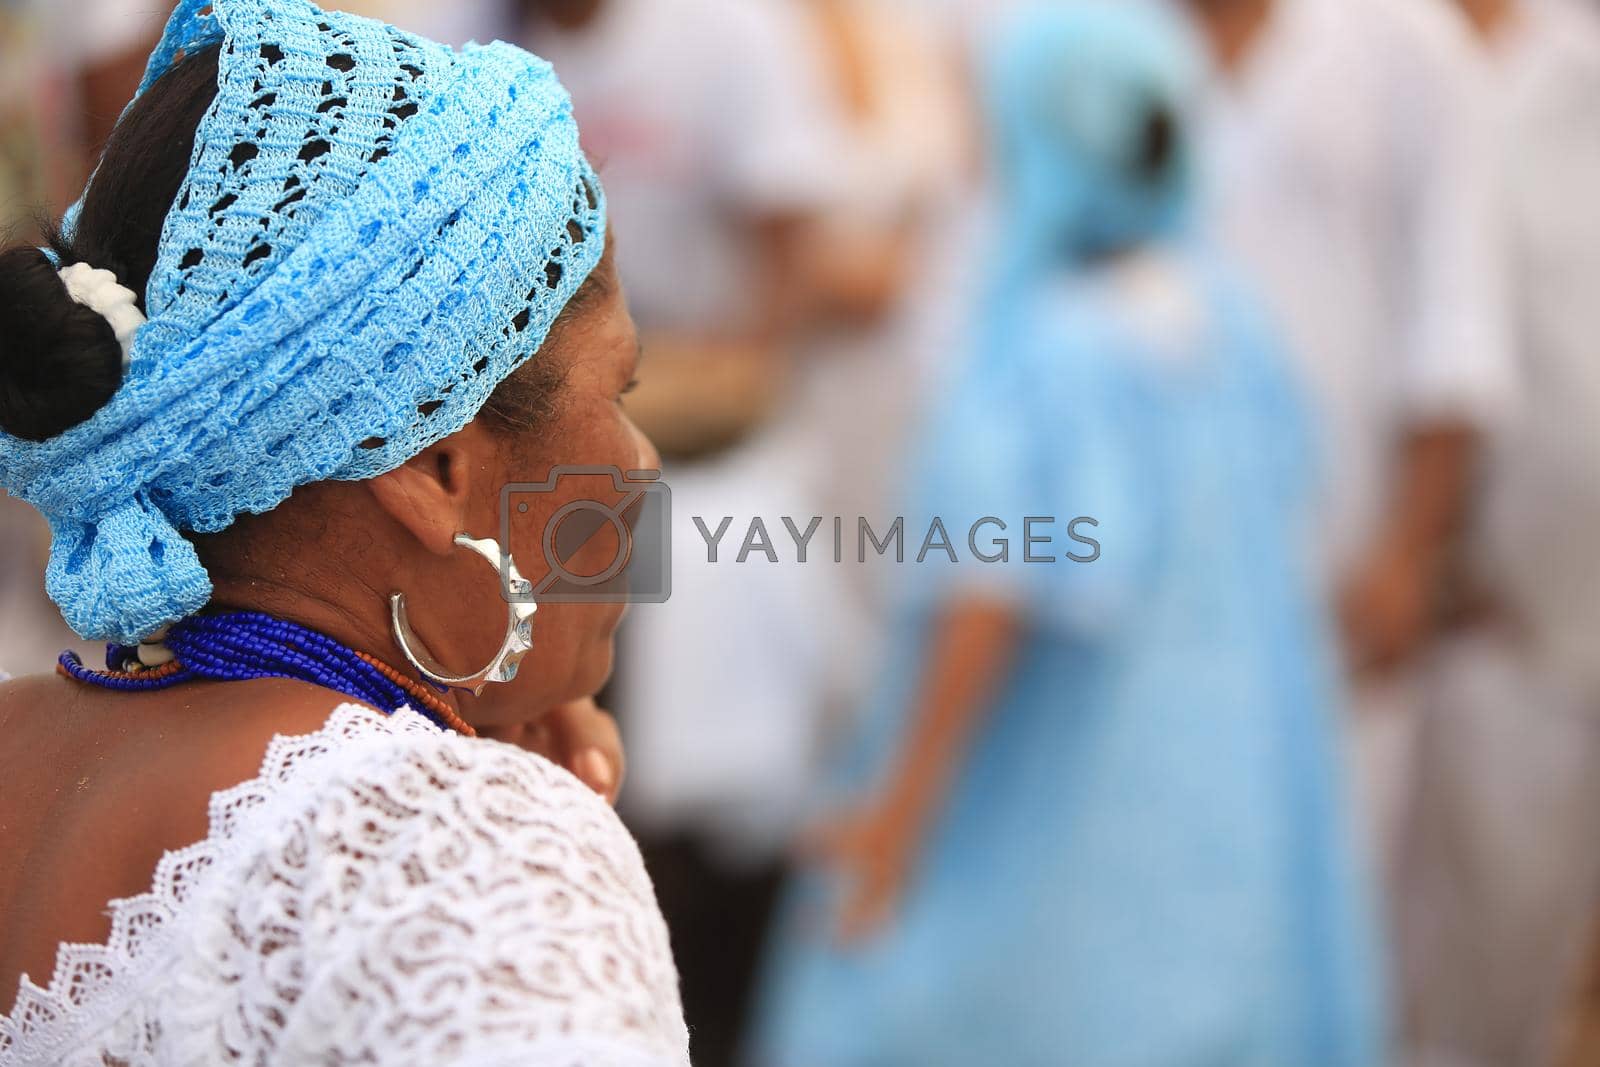 Royalty free image of Yemanja's party in Salvador by joasouza